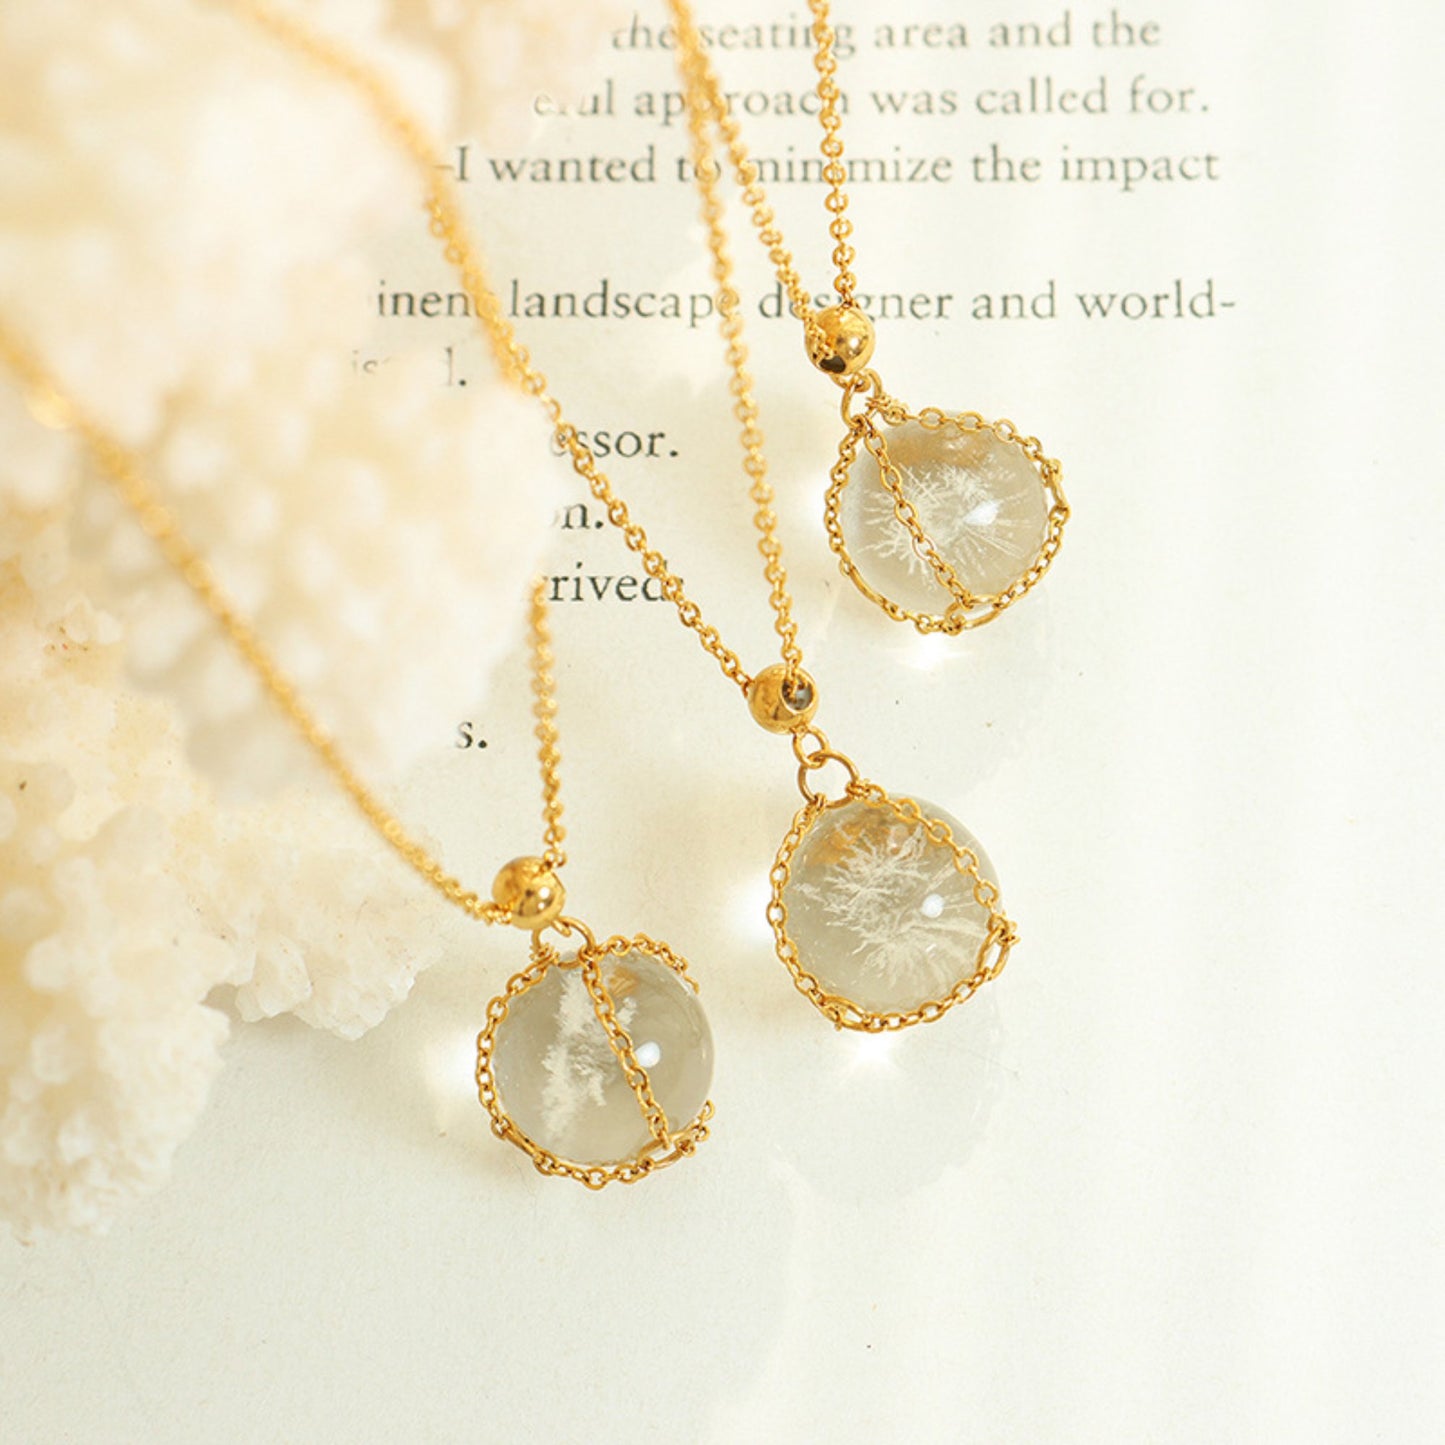 Crystal Ball Pendant Necklace/Waterproof